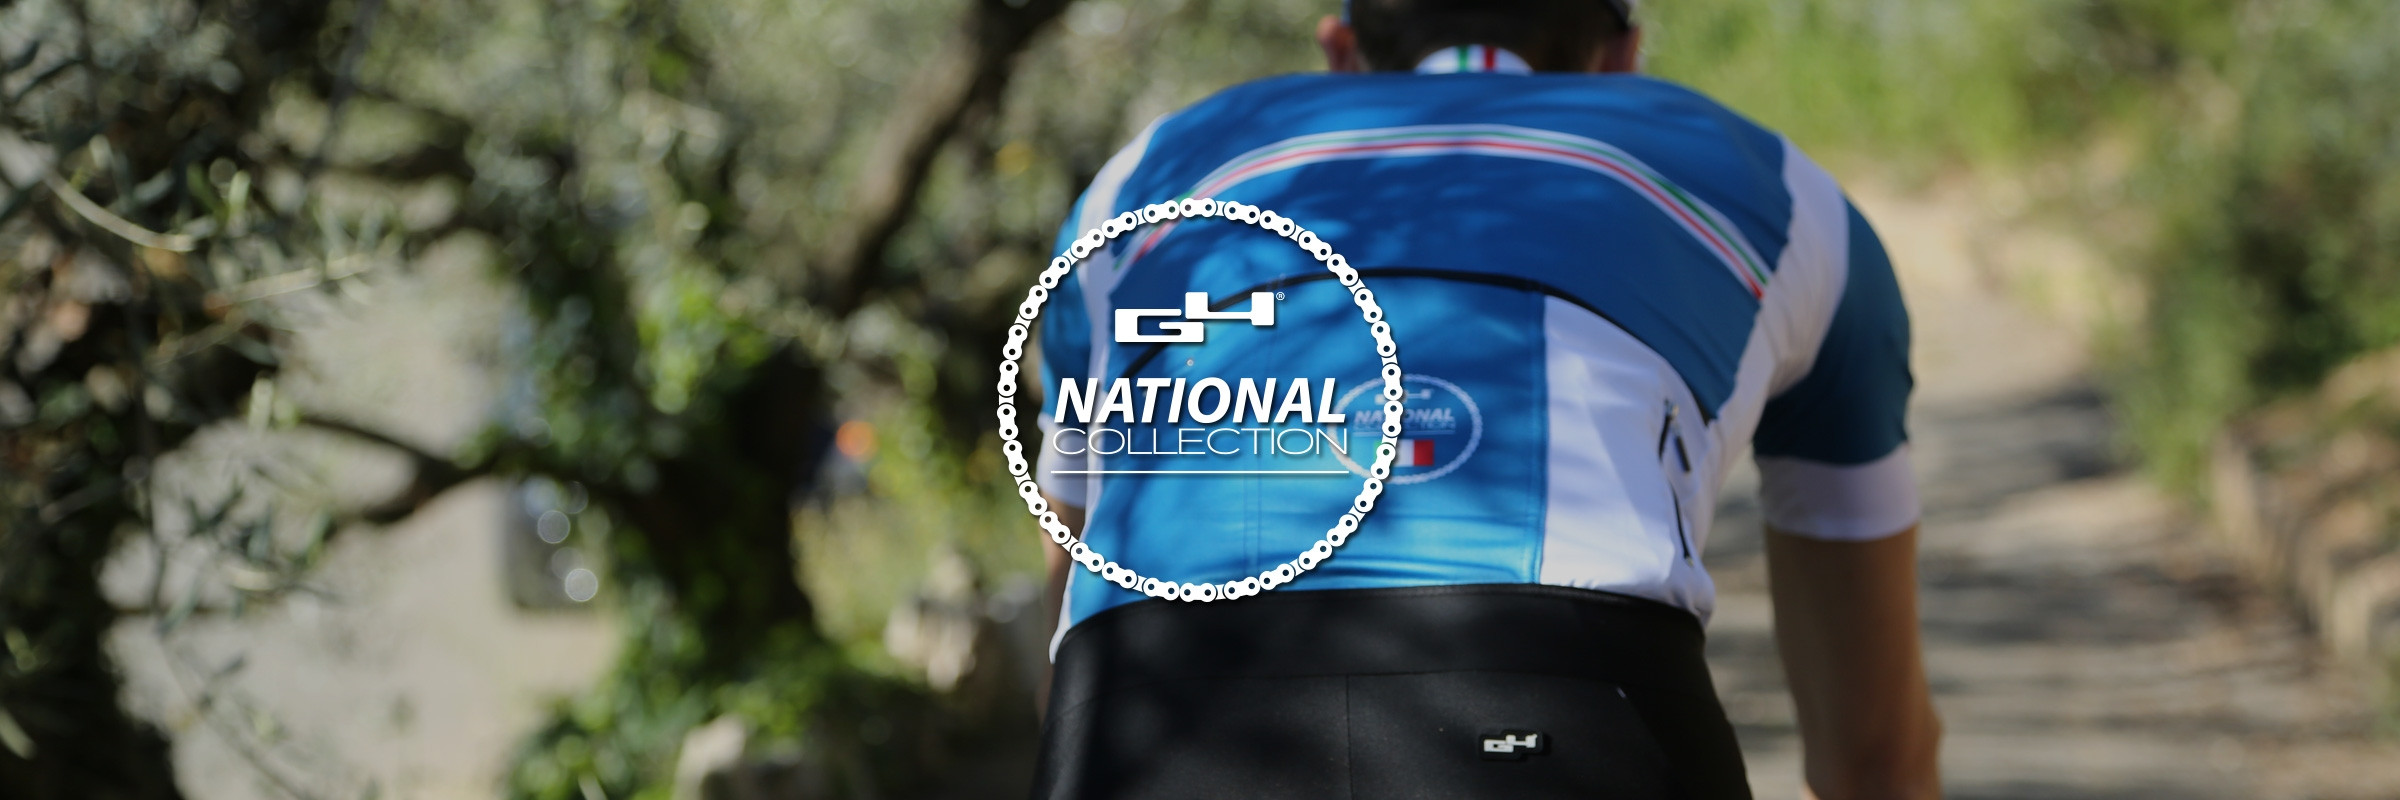 National Cycling Collection •••• G4 Dimension